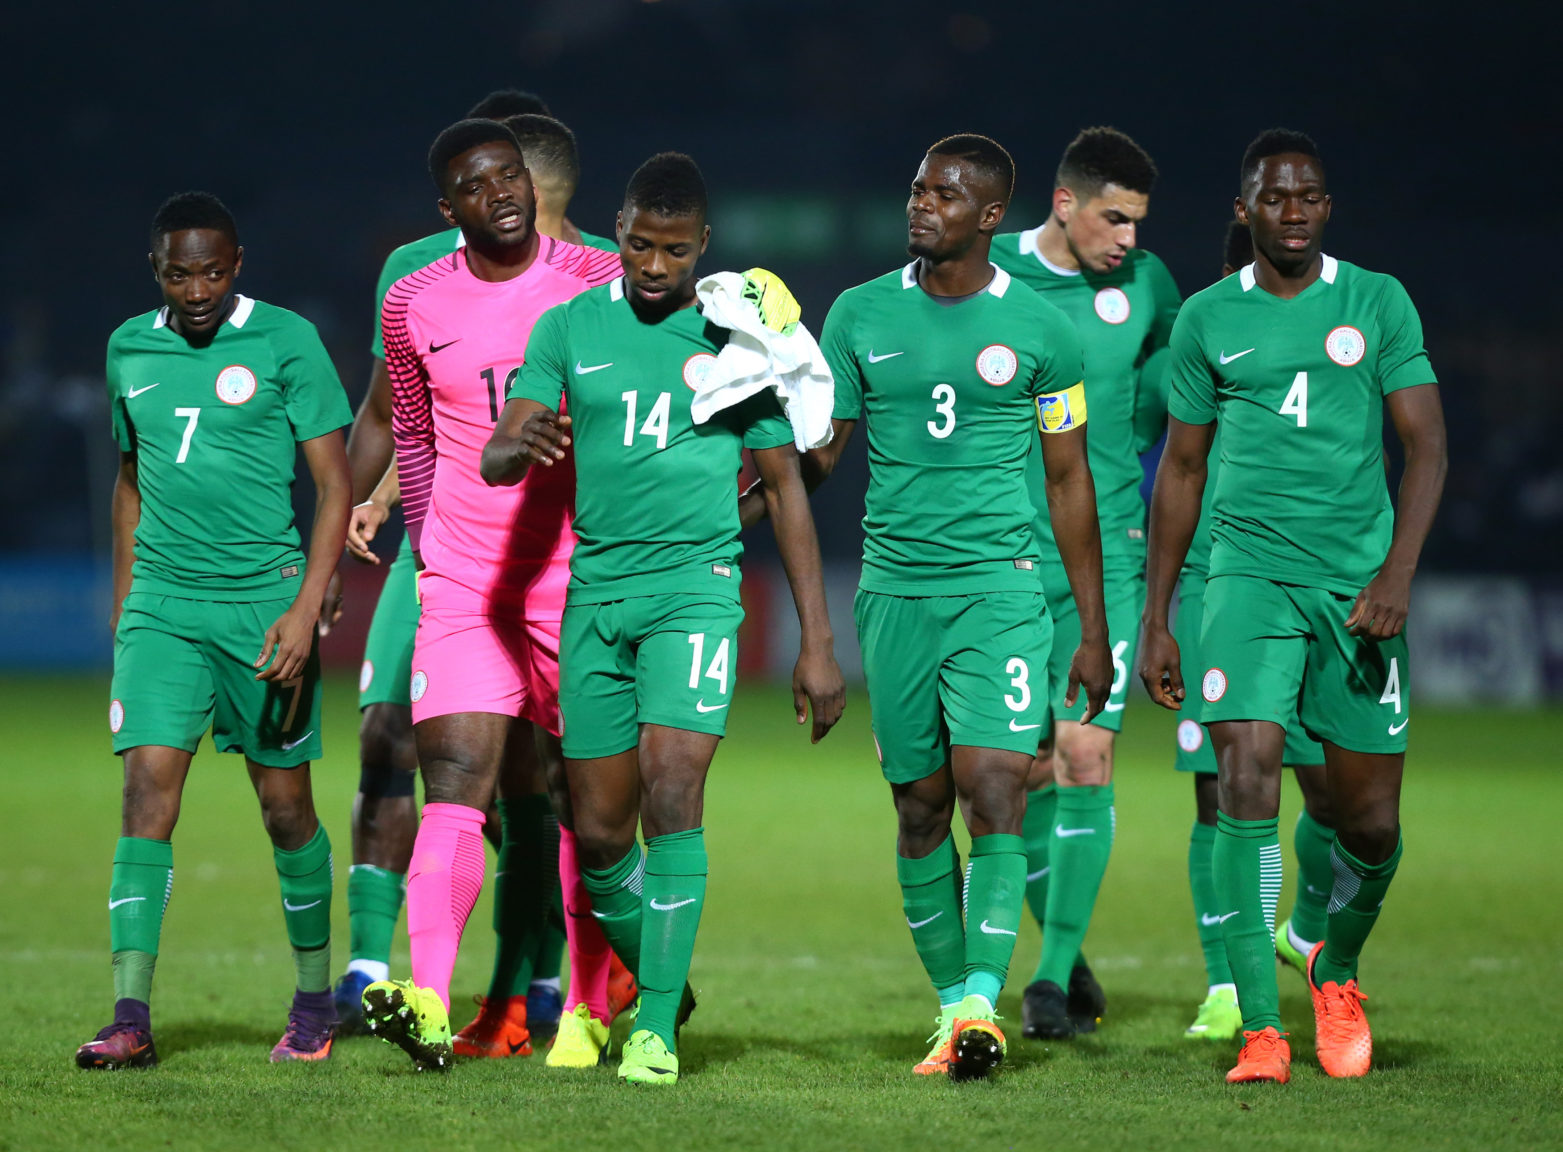 AFCON qualifier: South Africa's Bafana Bafana shock Super Eagles in Uyo